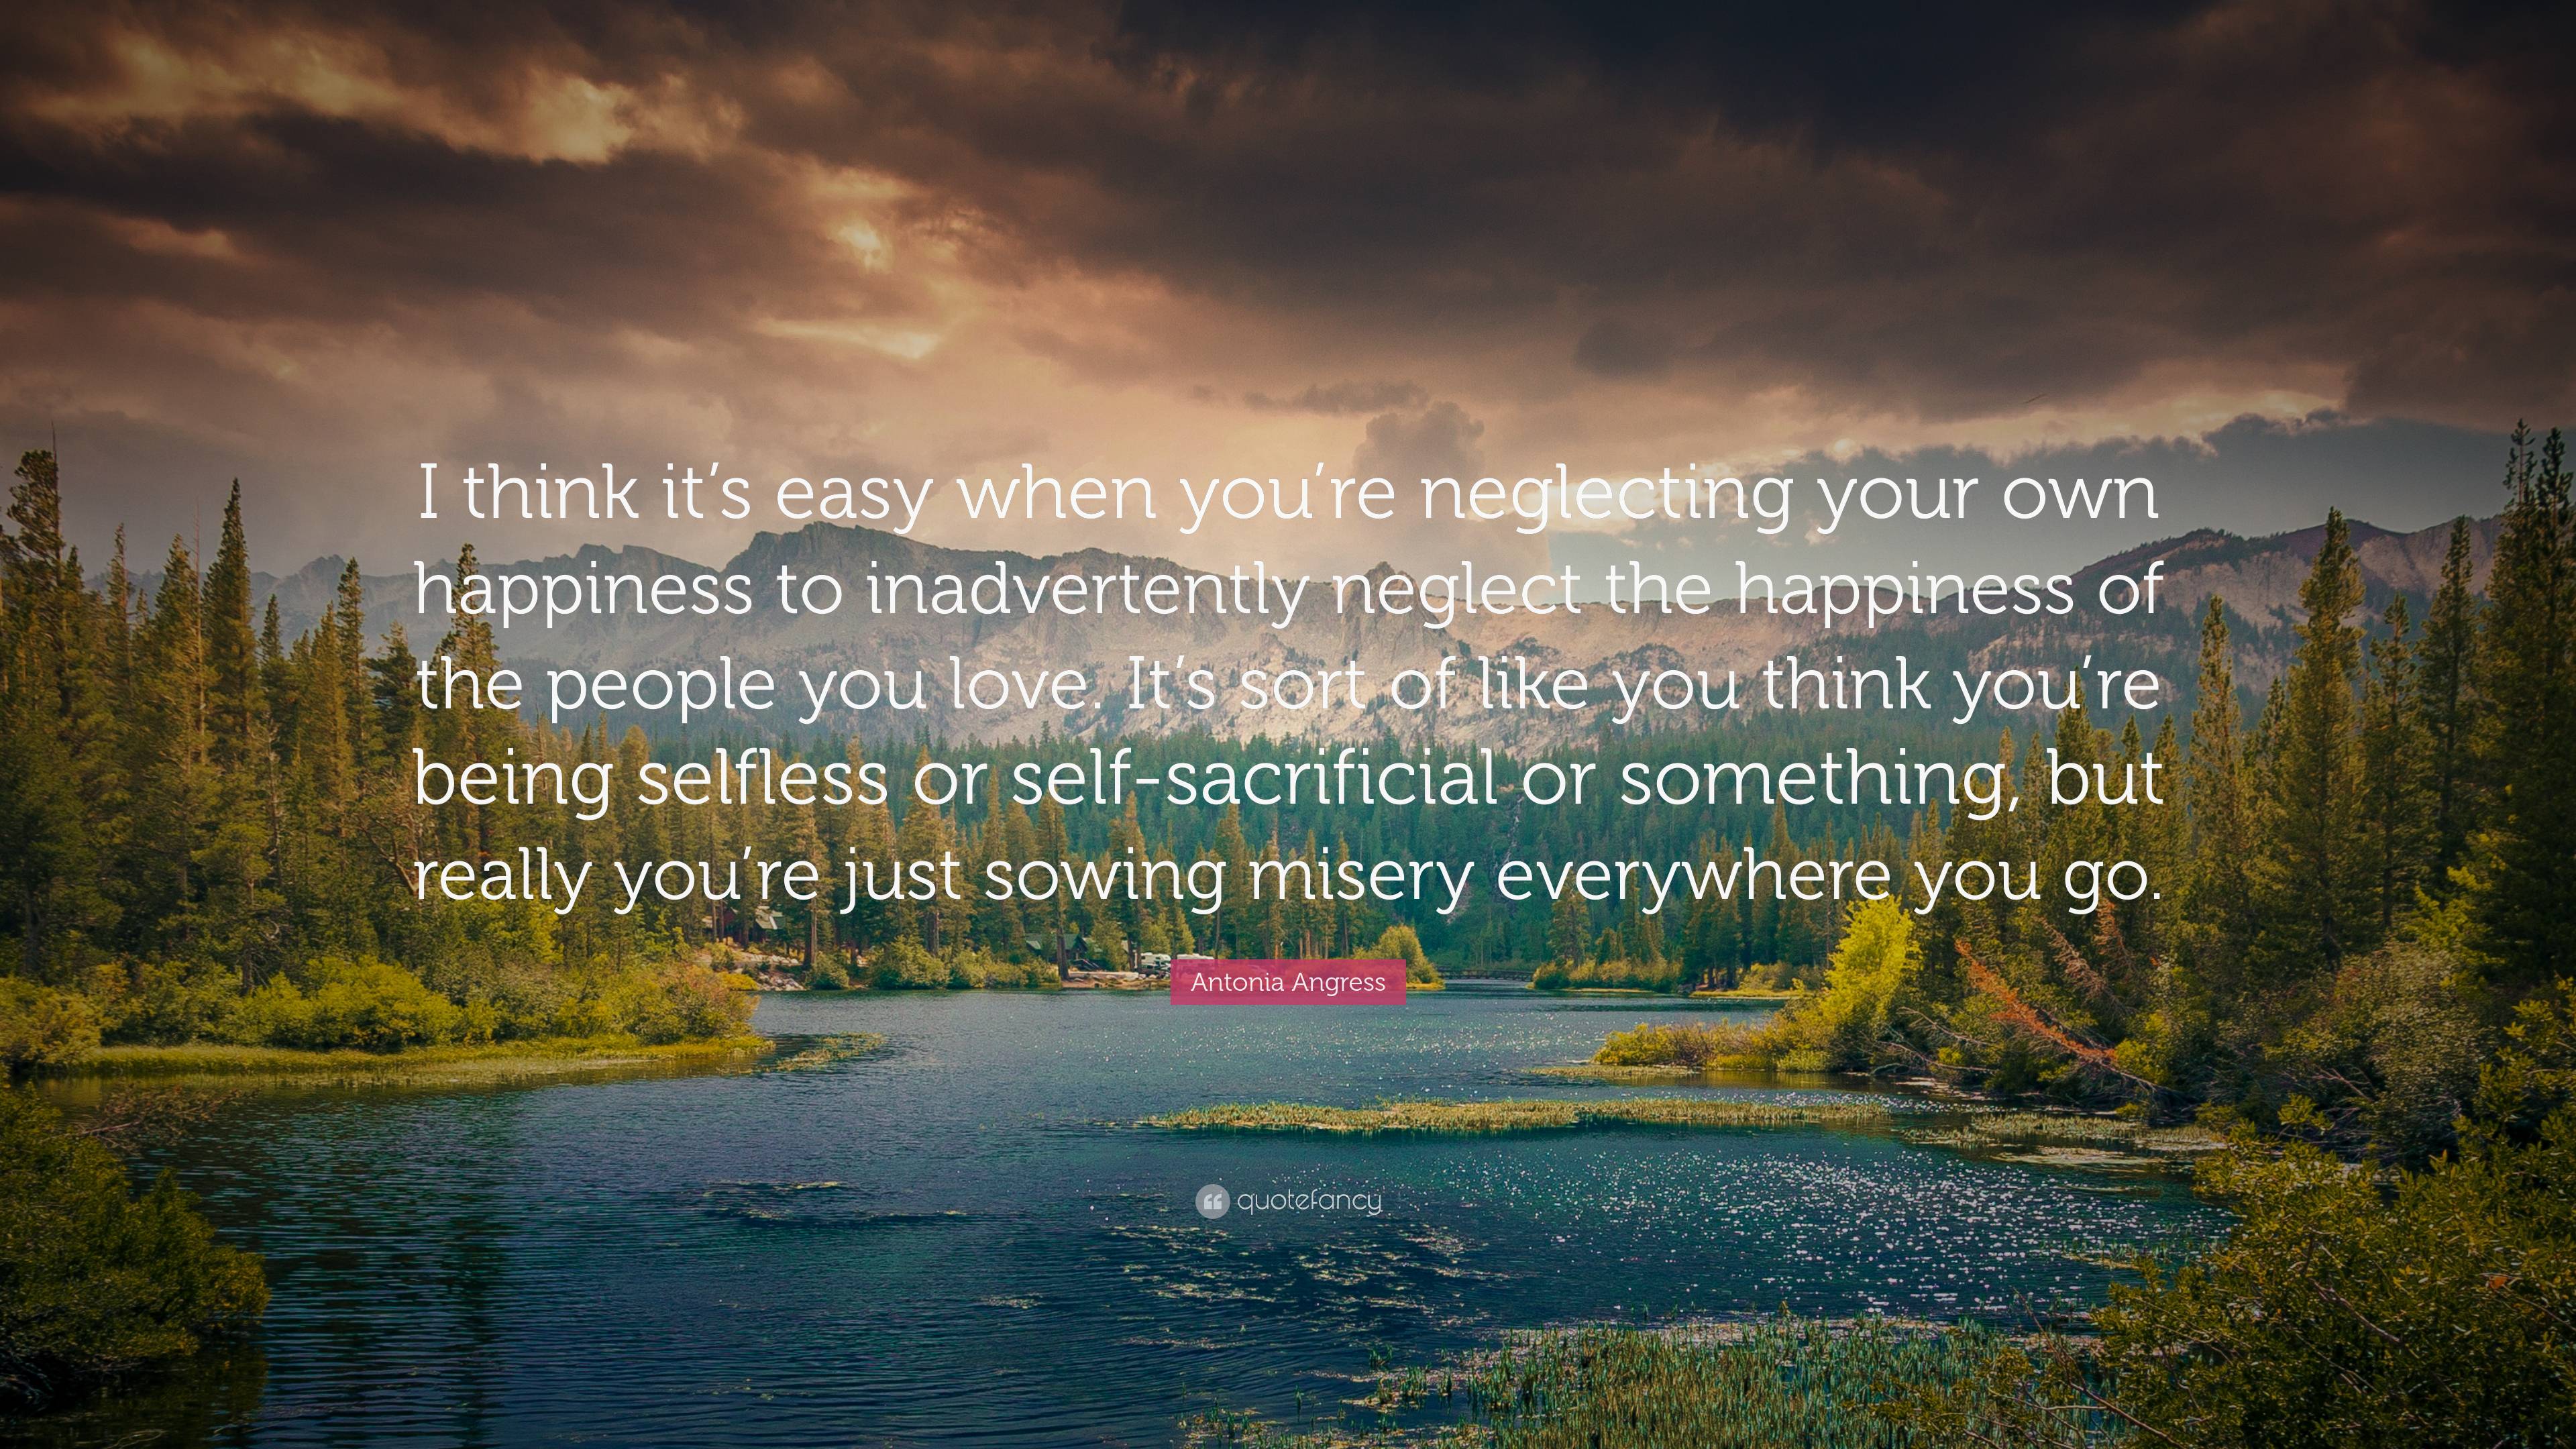 Antonia Angress Quote: “I think it’s easy when you’re neglecting your ...